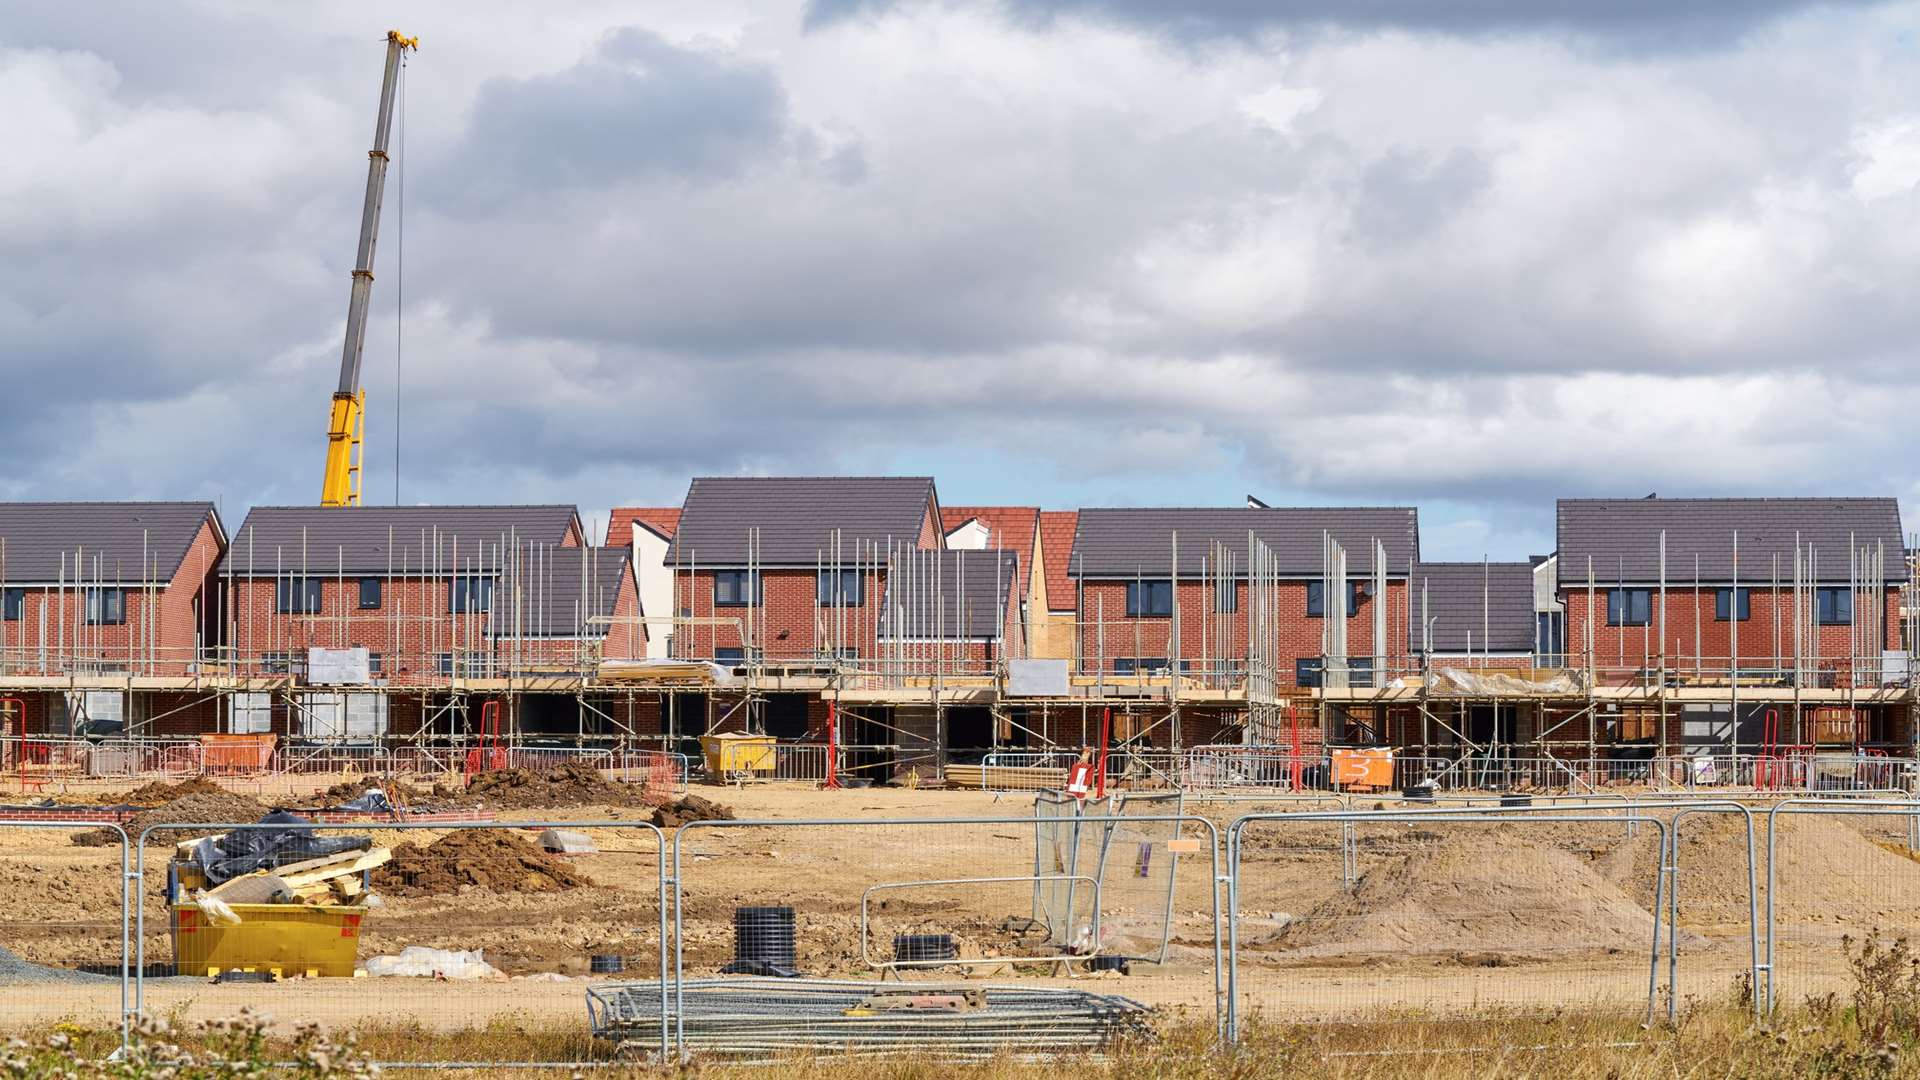 Ashford Borough Council had the biggest year-on-year fall for the number of dwellings completed